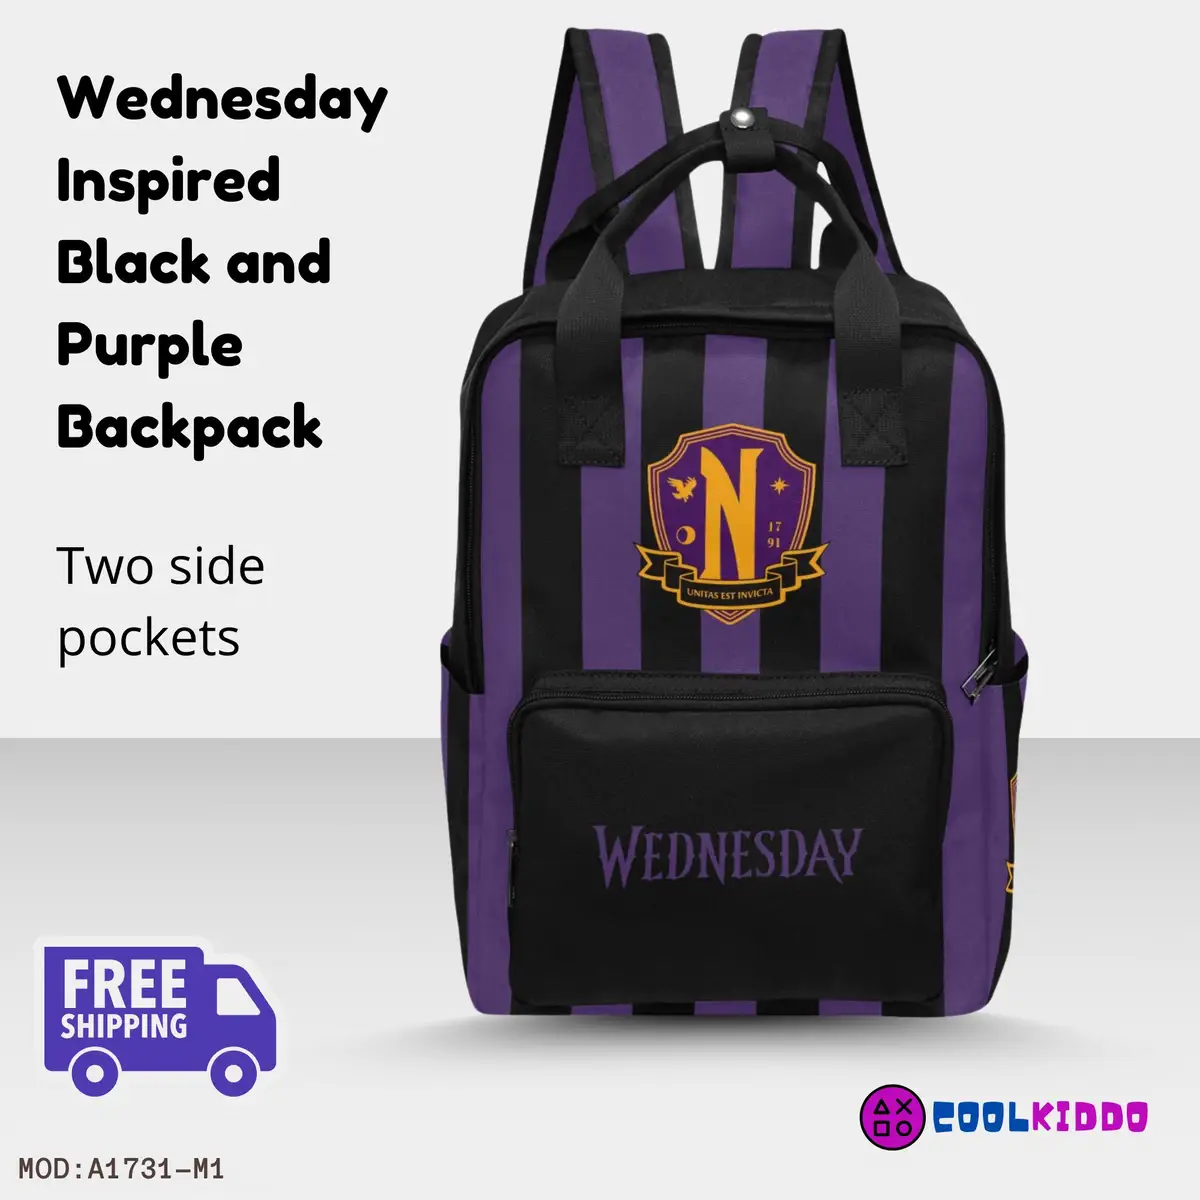 Wednesday Addams Uniform Inspired Black and Purple Backpack, Youth Book Bag for School, Nevermore Academy Rucksack Cool Kiddo 14